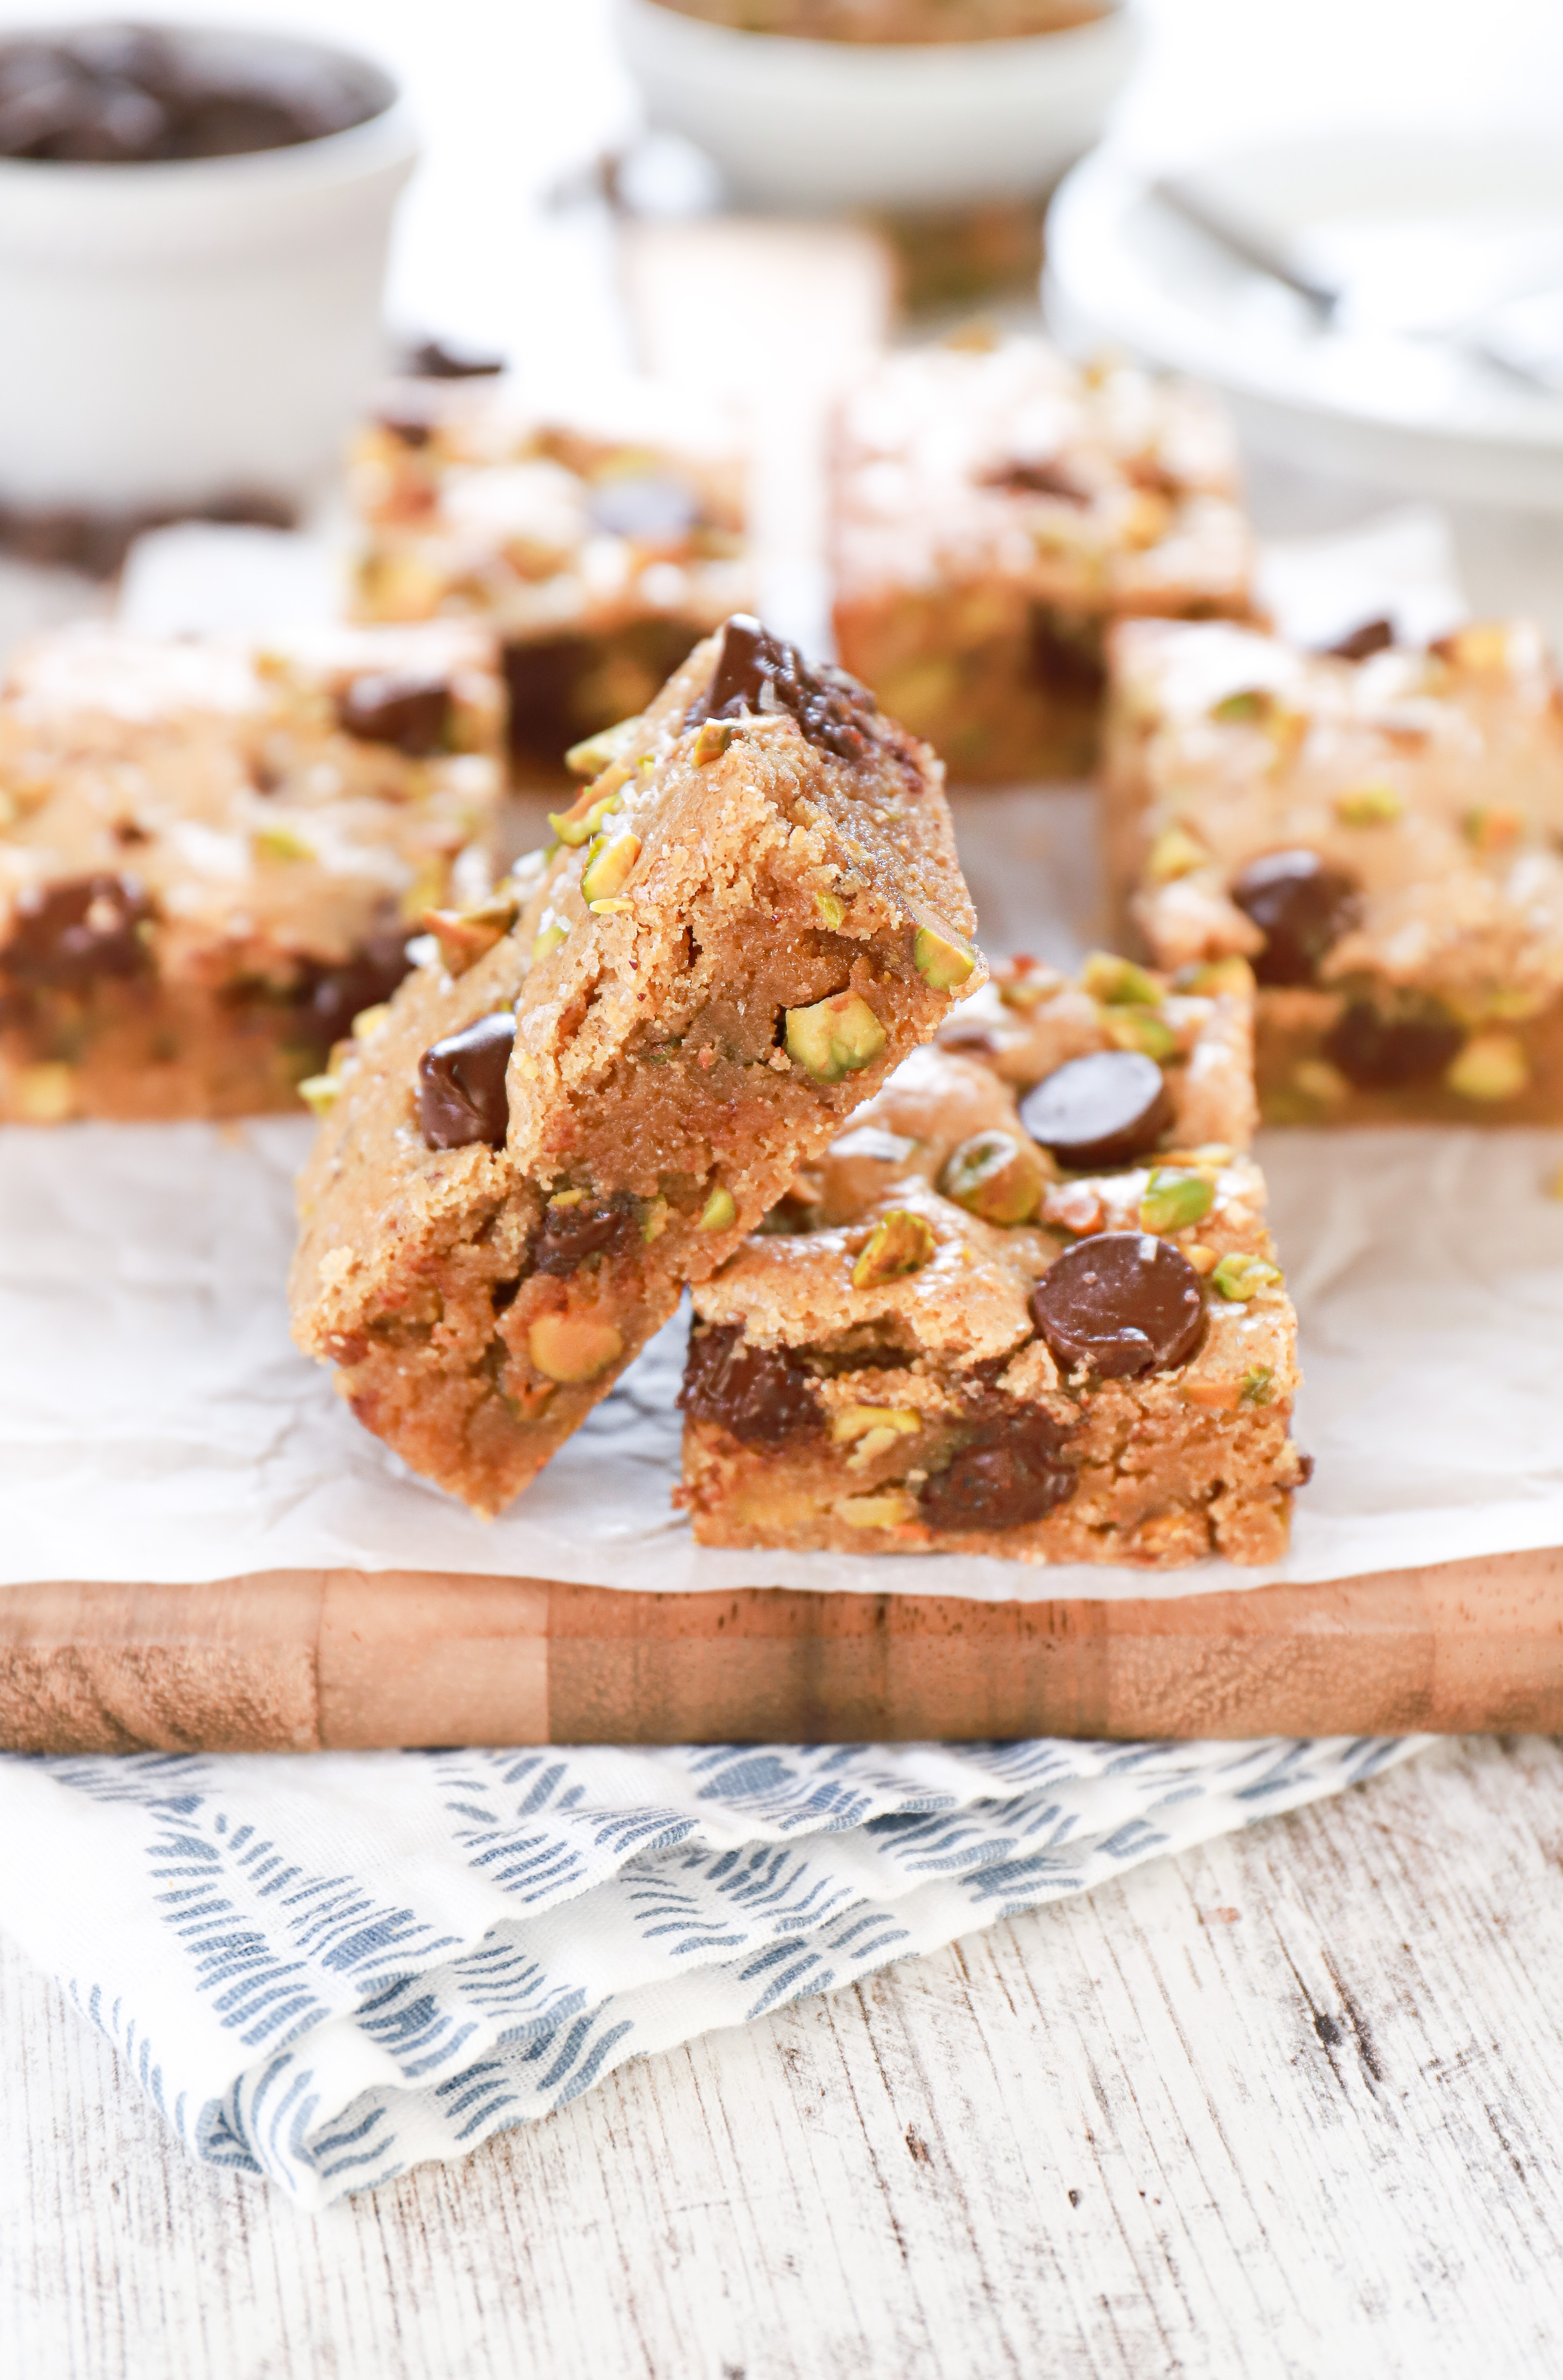 Up close side view of a salted dark chocolate pistachio blondie bar on a parchment paper covered cutting board with more bars in the background.